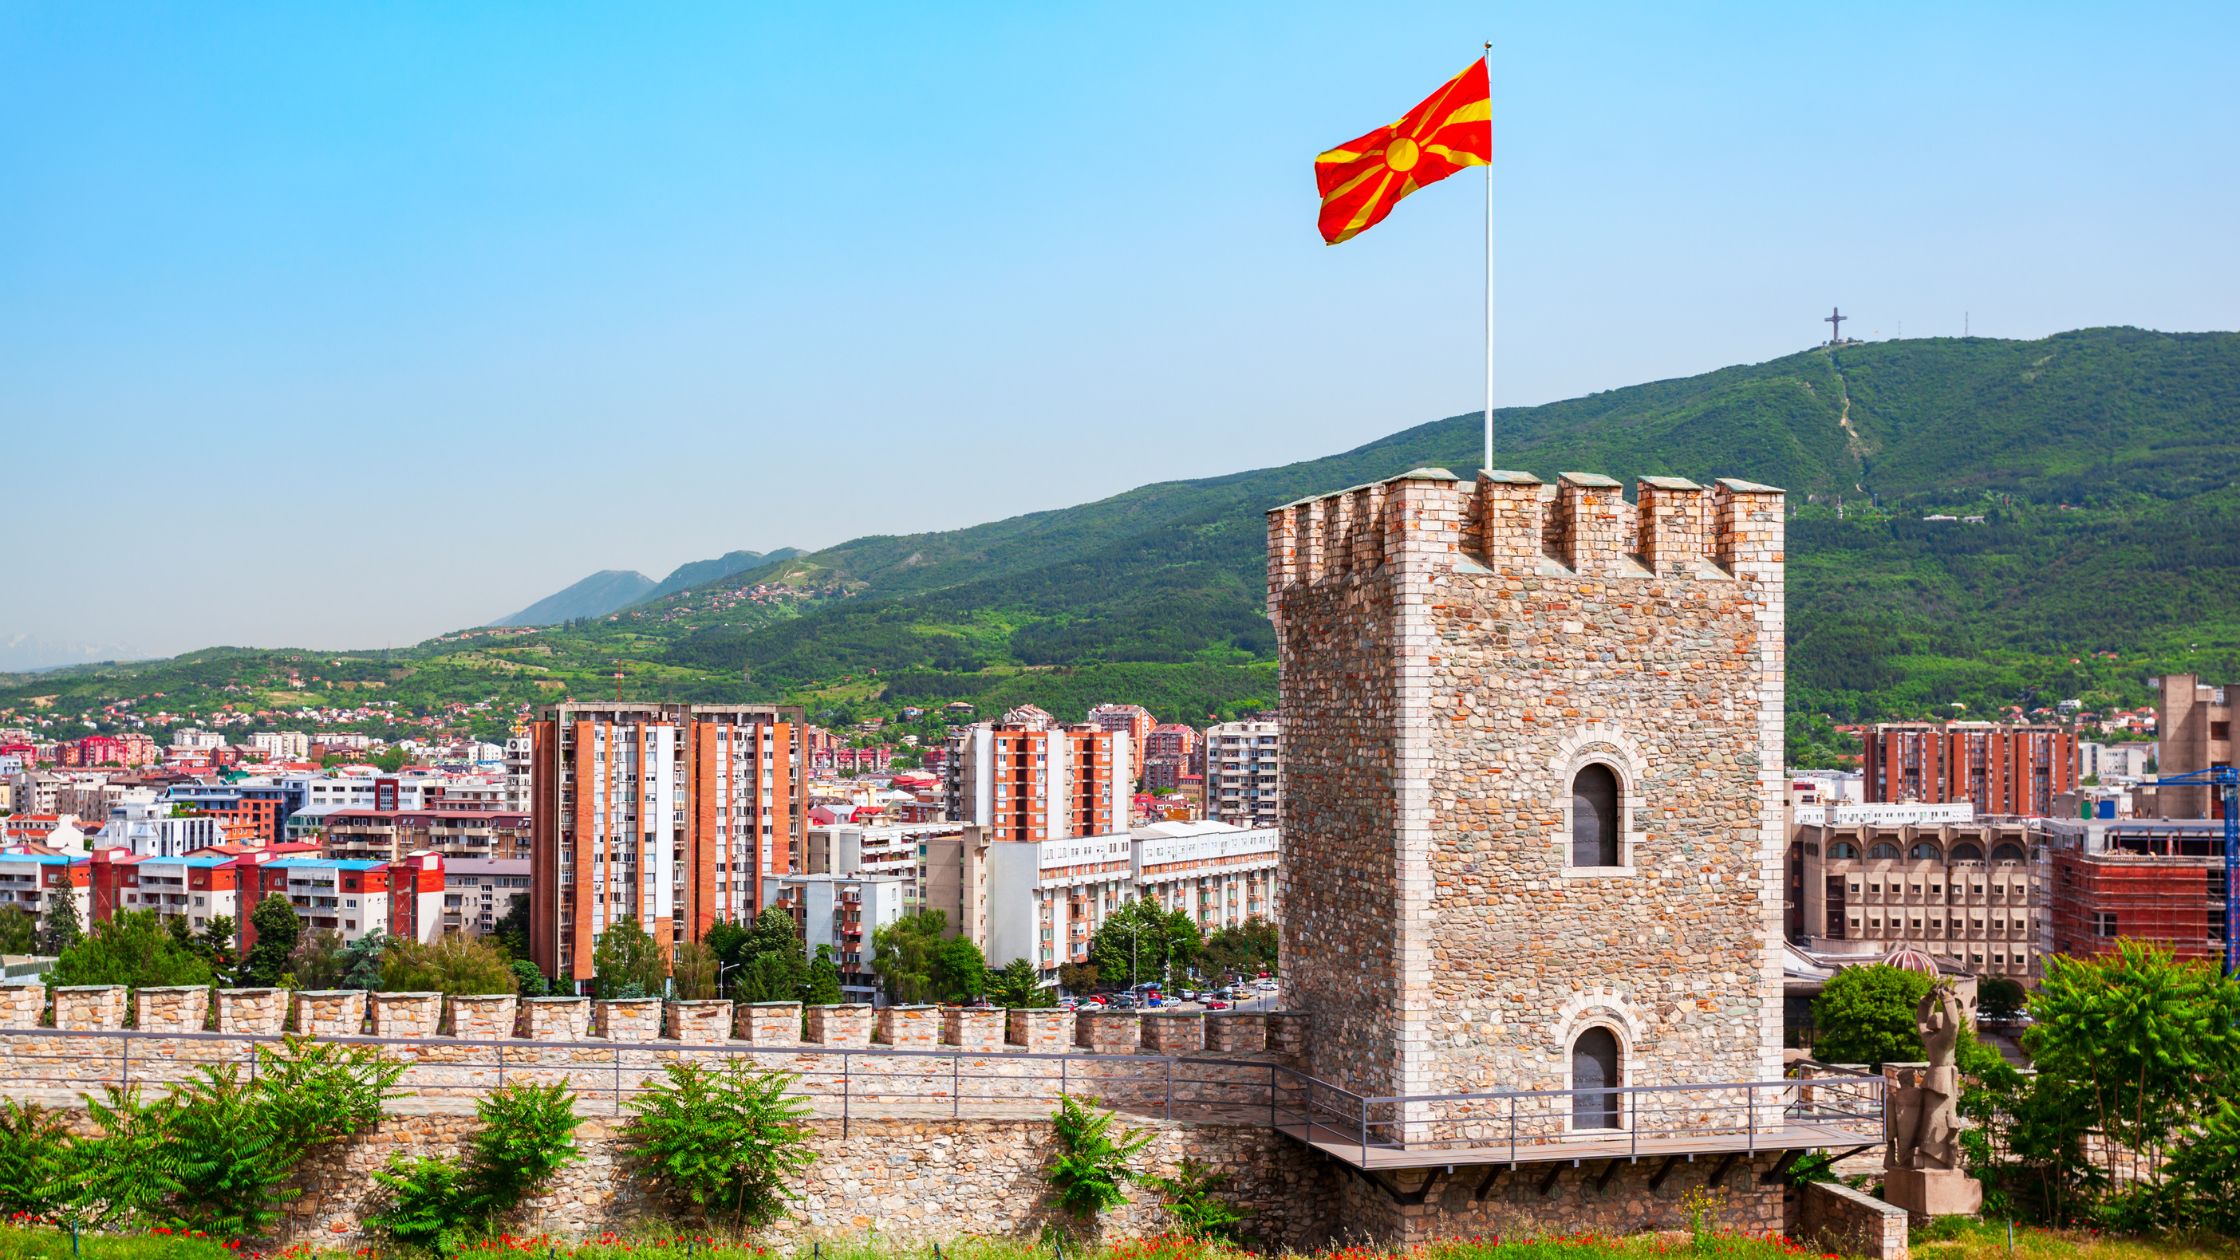 Skopje Fortress is a historic fortress located in the old town of Skopje, capital of North Macedonia